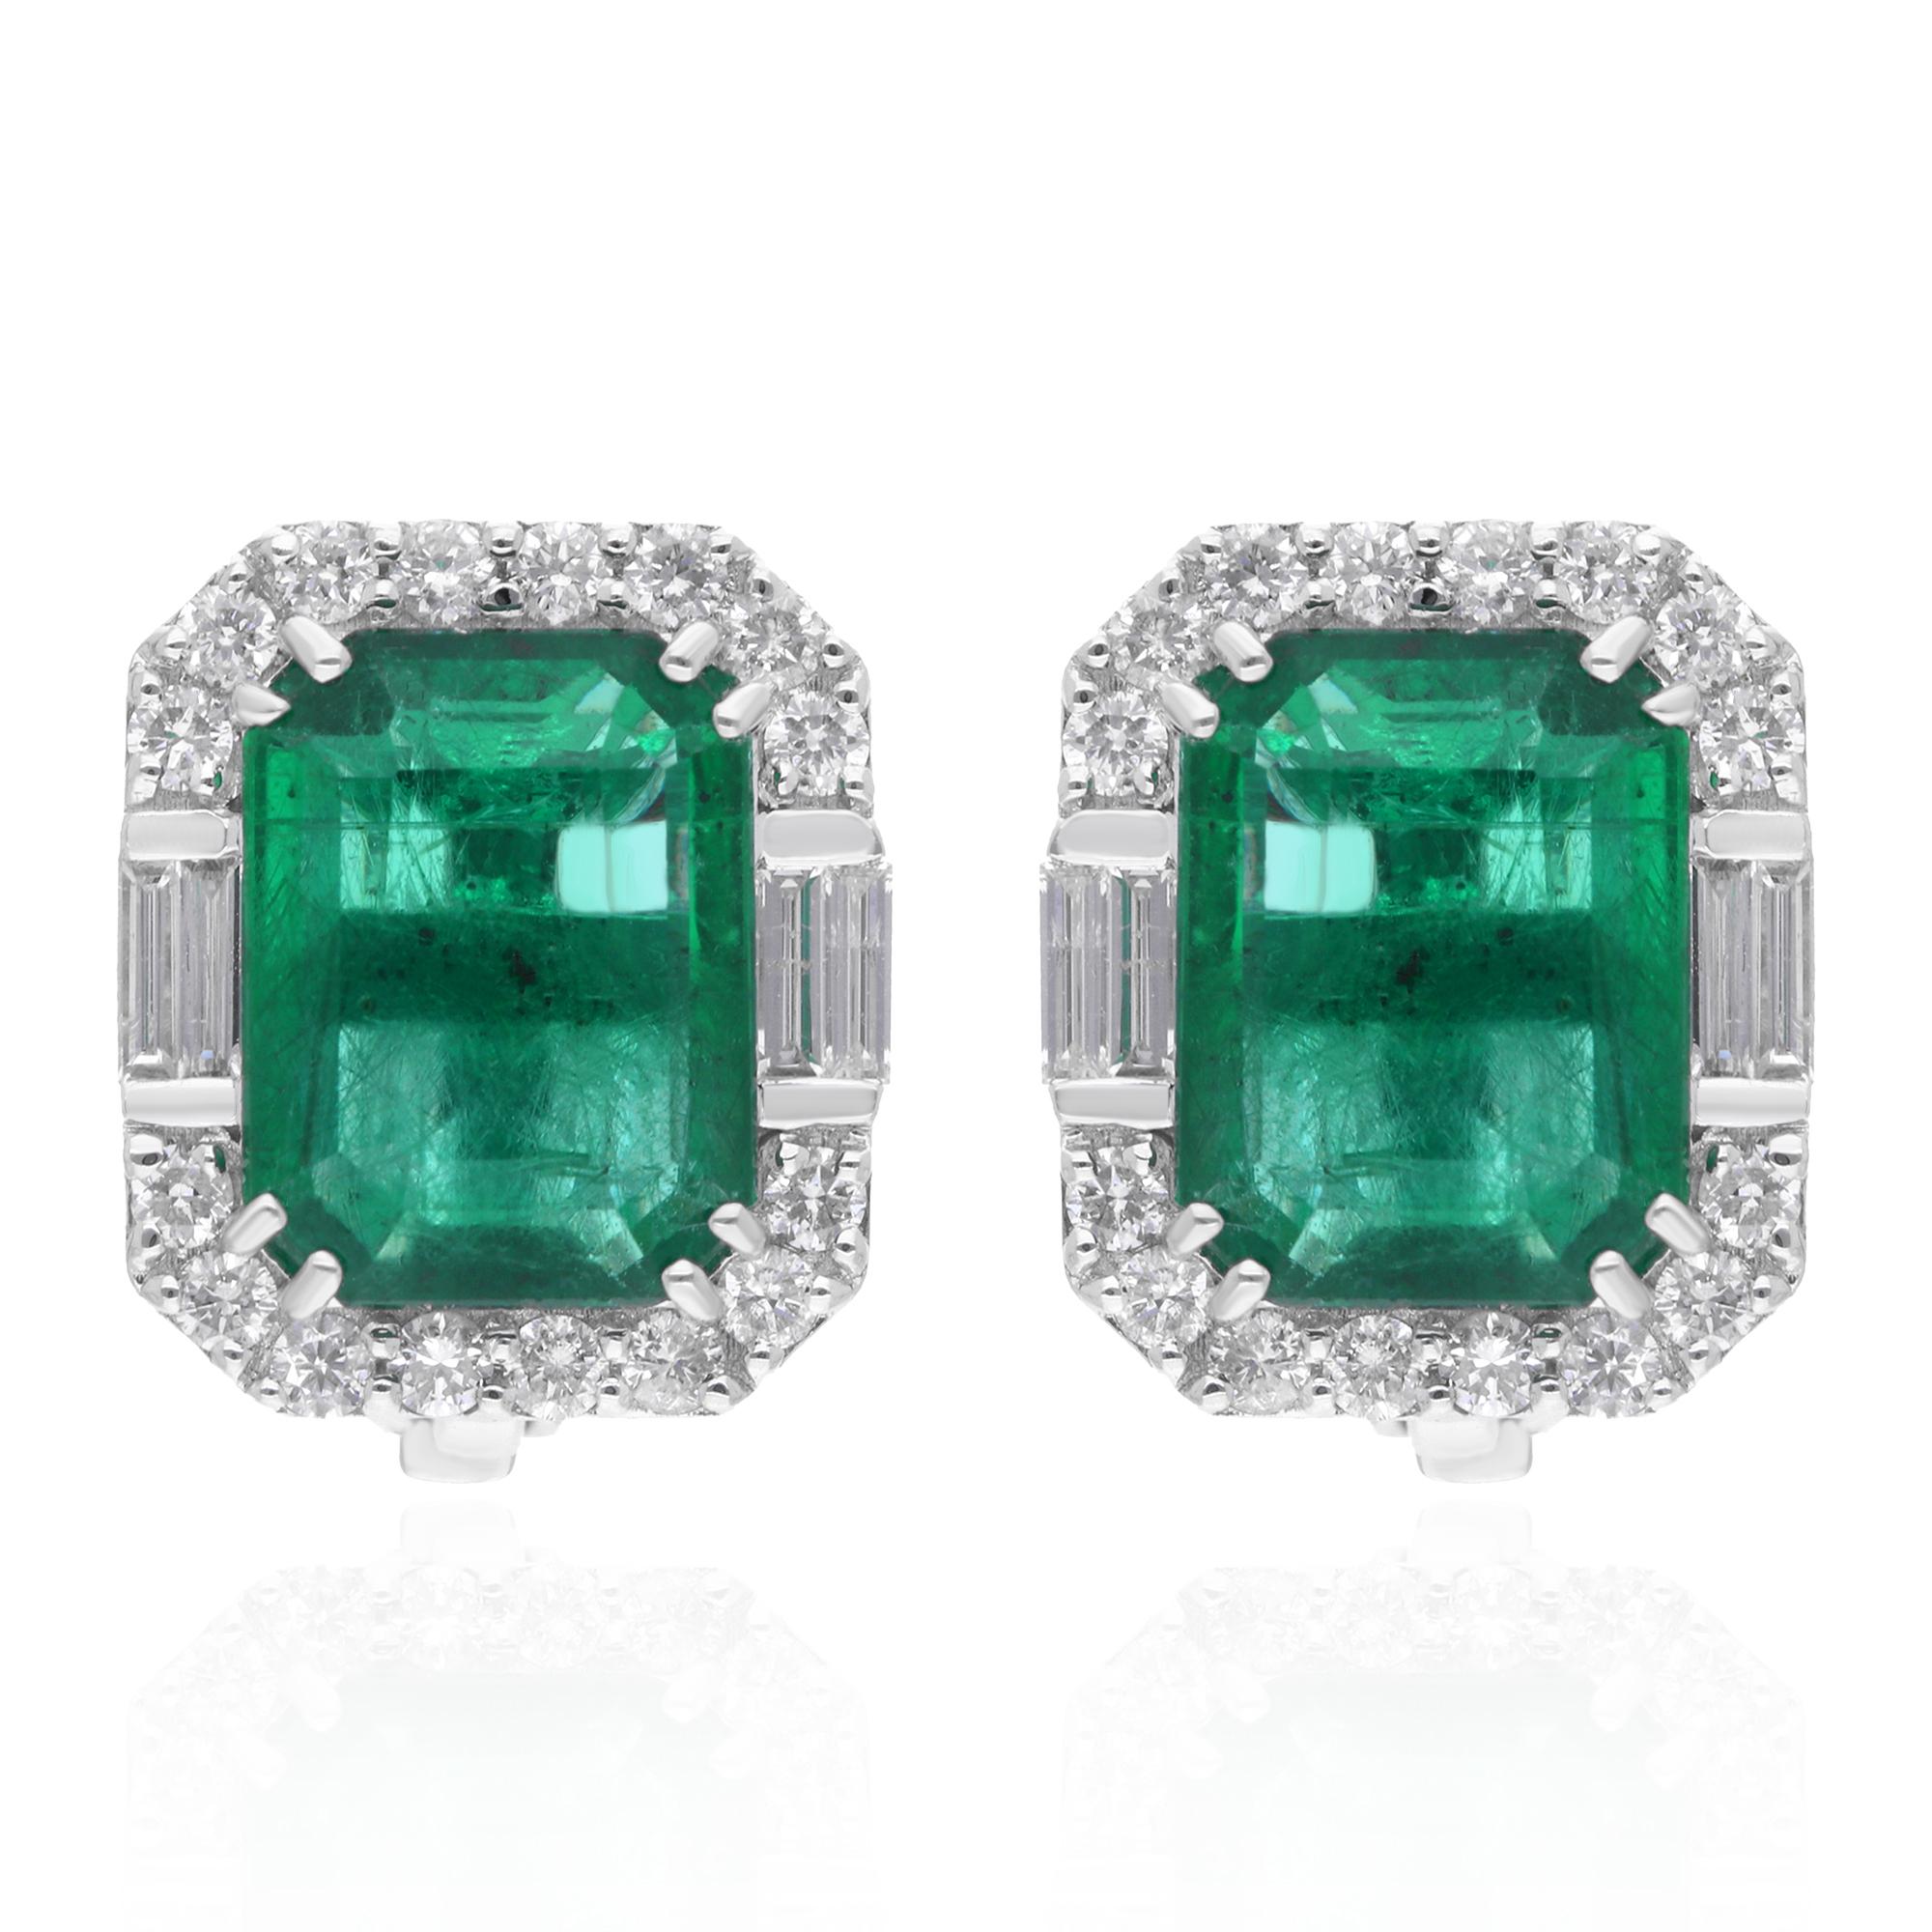 Indulge in the captivating allure of these Zambian Emerald Gemstone Stud Earrings, exquisitely crafted in 18 karat white gold. Each earring features a mesmerizing Zambian emerald, renowned for its rich green hue and exceptional clarity, creating a